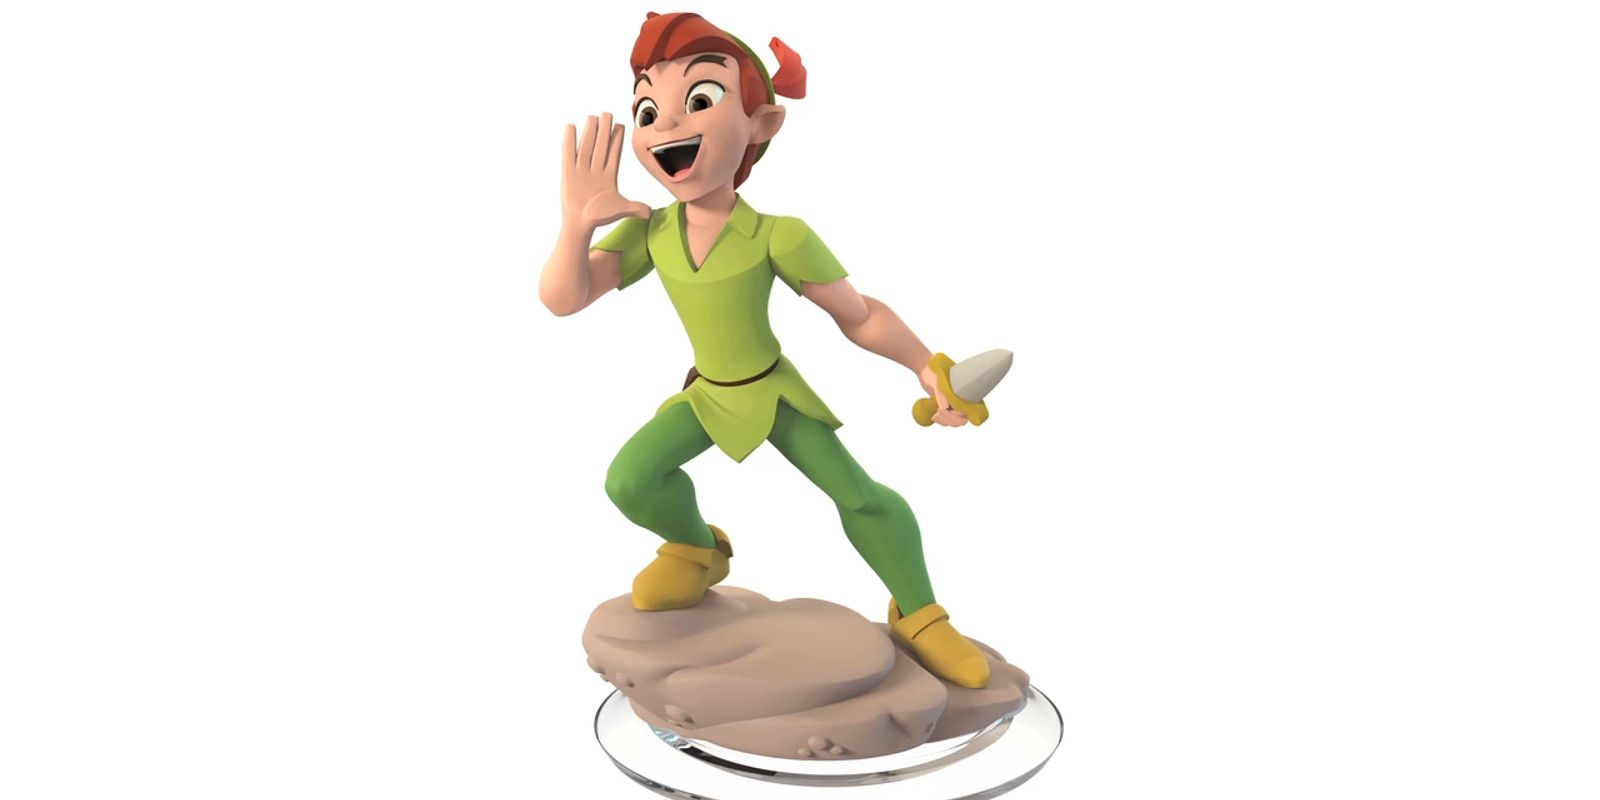 Official render of the Peter Pan figure for Disney Infinity